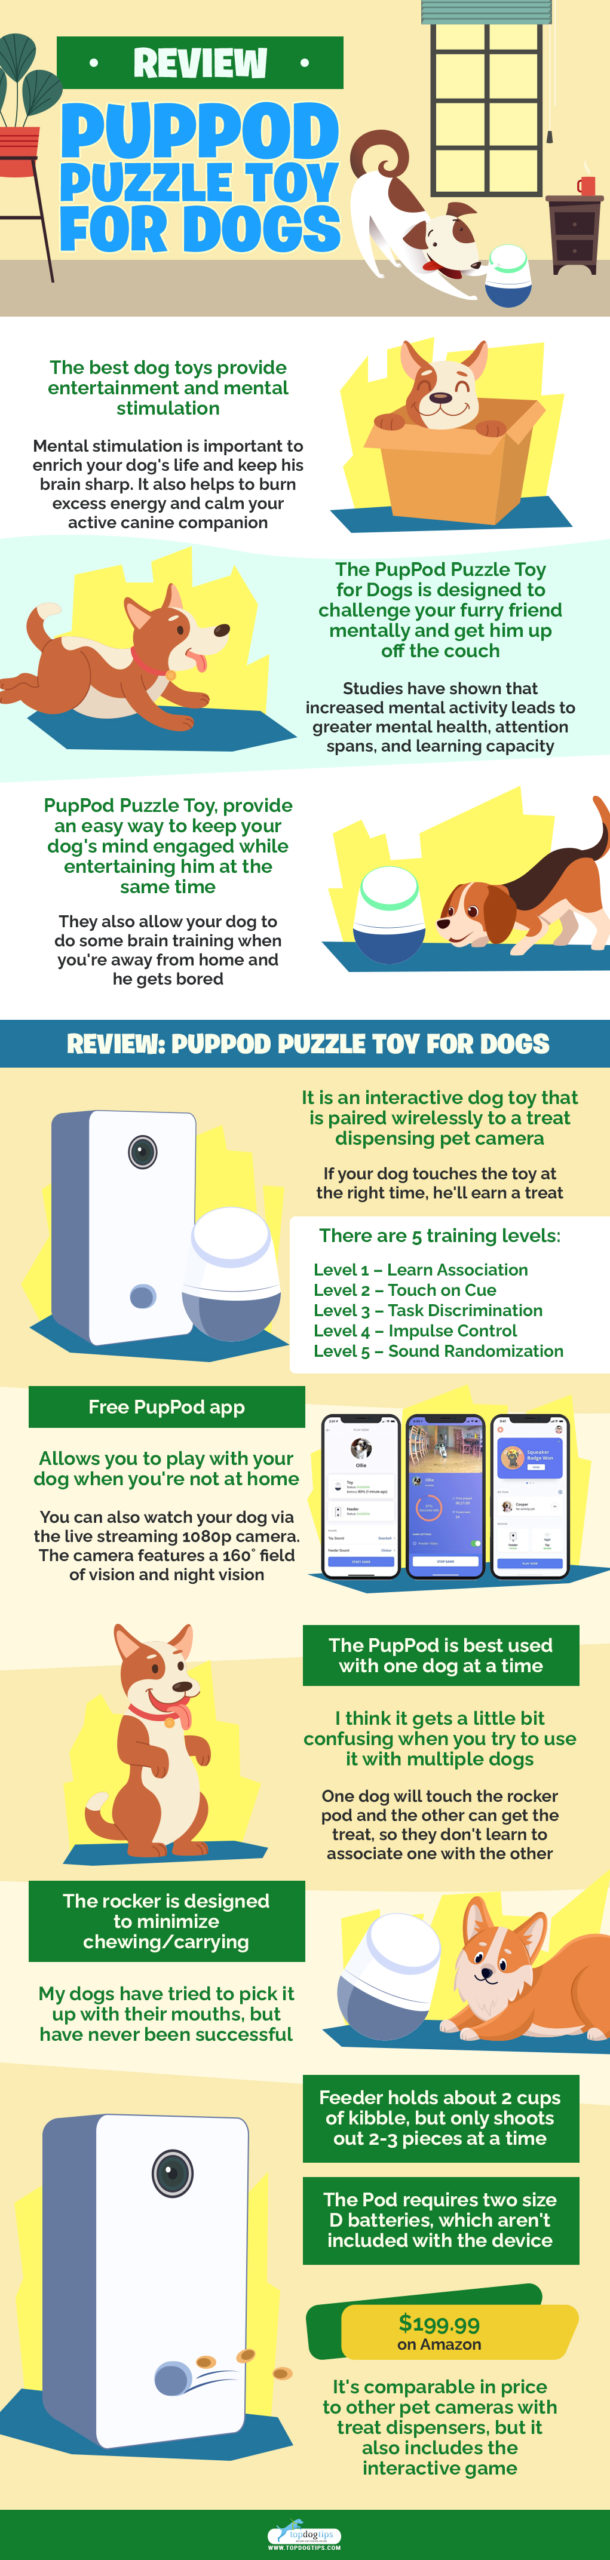 Review PupPod Puzzle Toy for Dogs